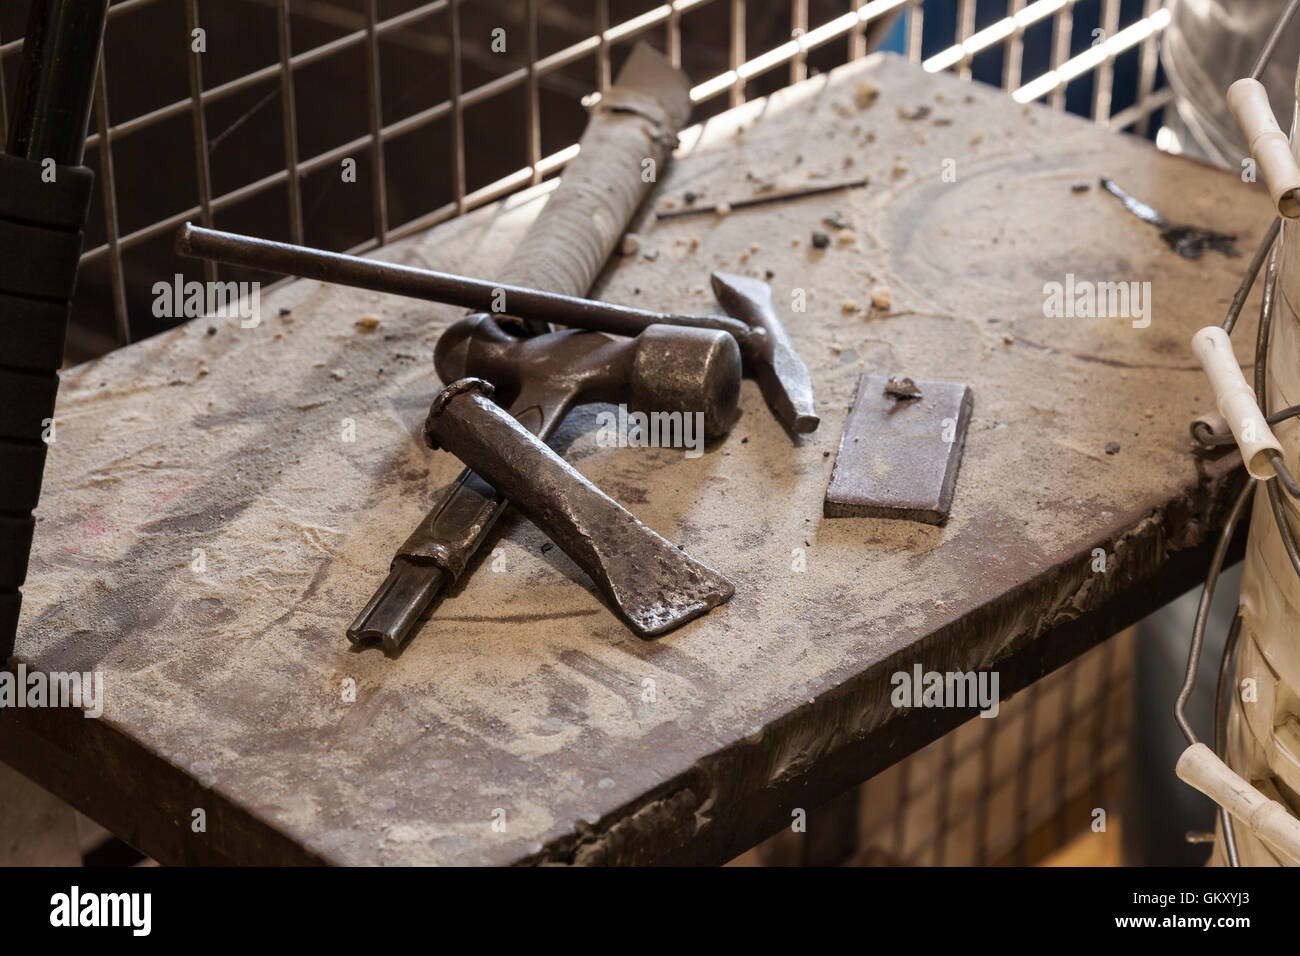 steel tools for manufacturing on a steel bench Stock Photo